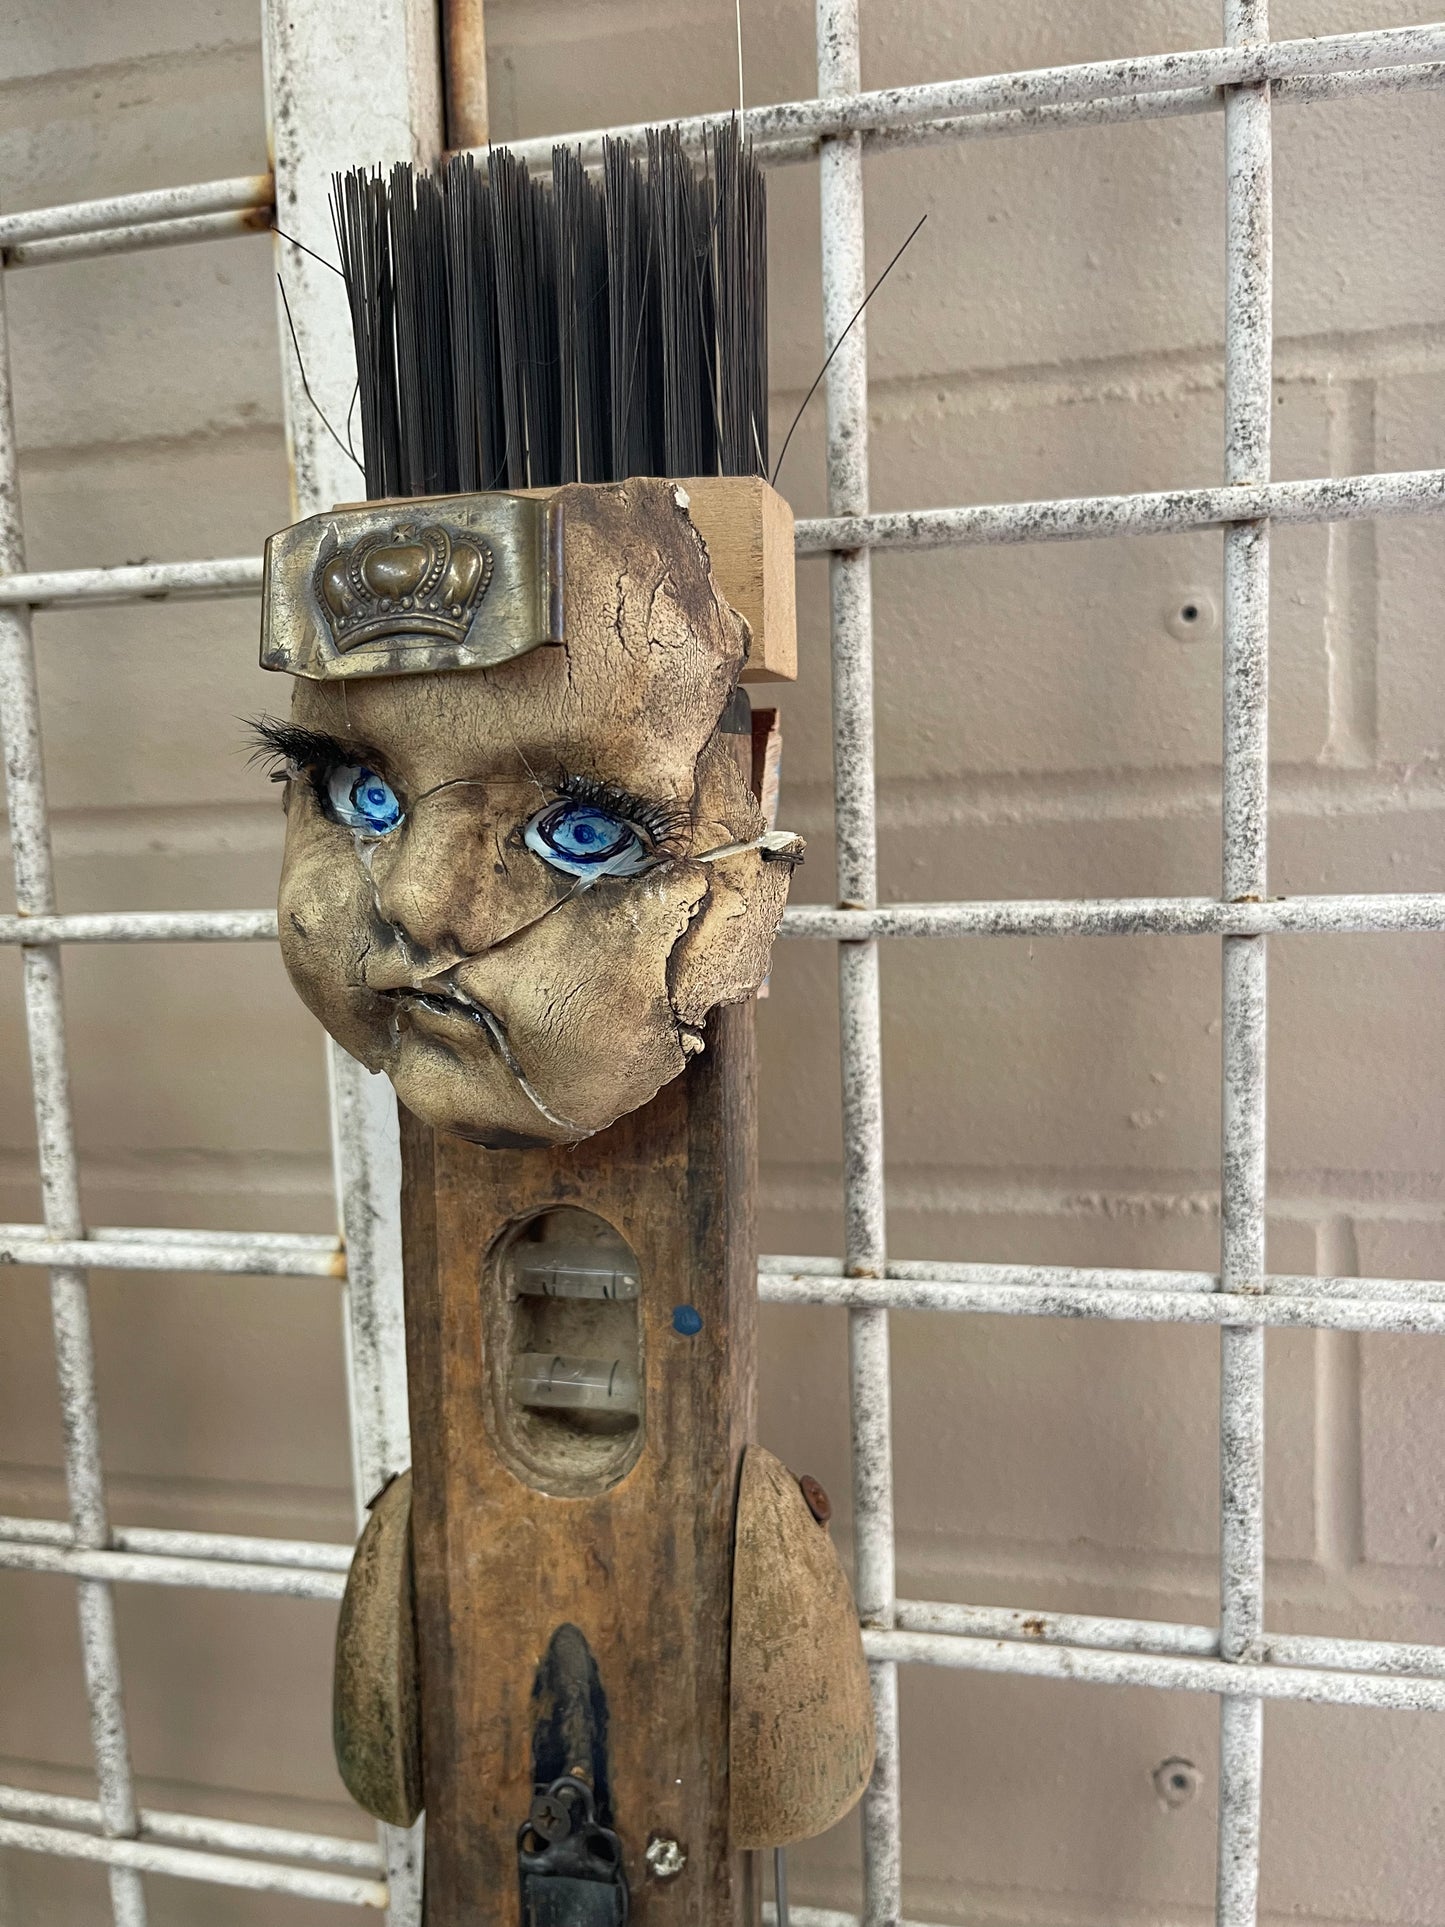 Found Art sculpture - doll head on level with fish feet